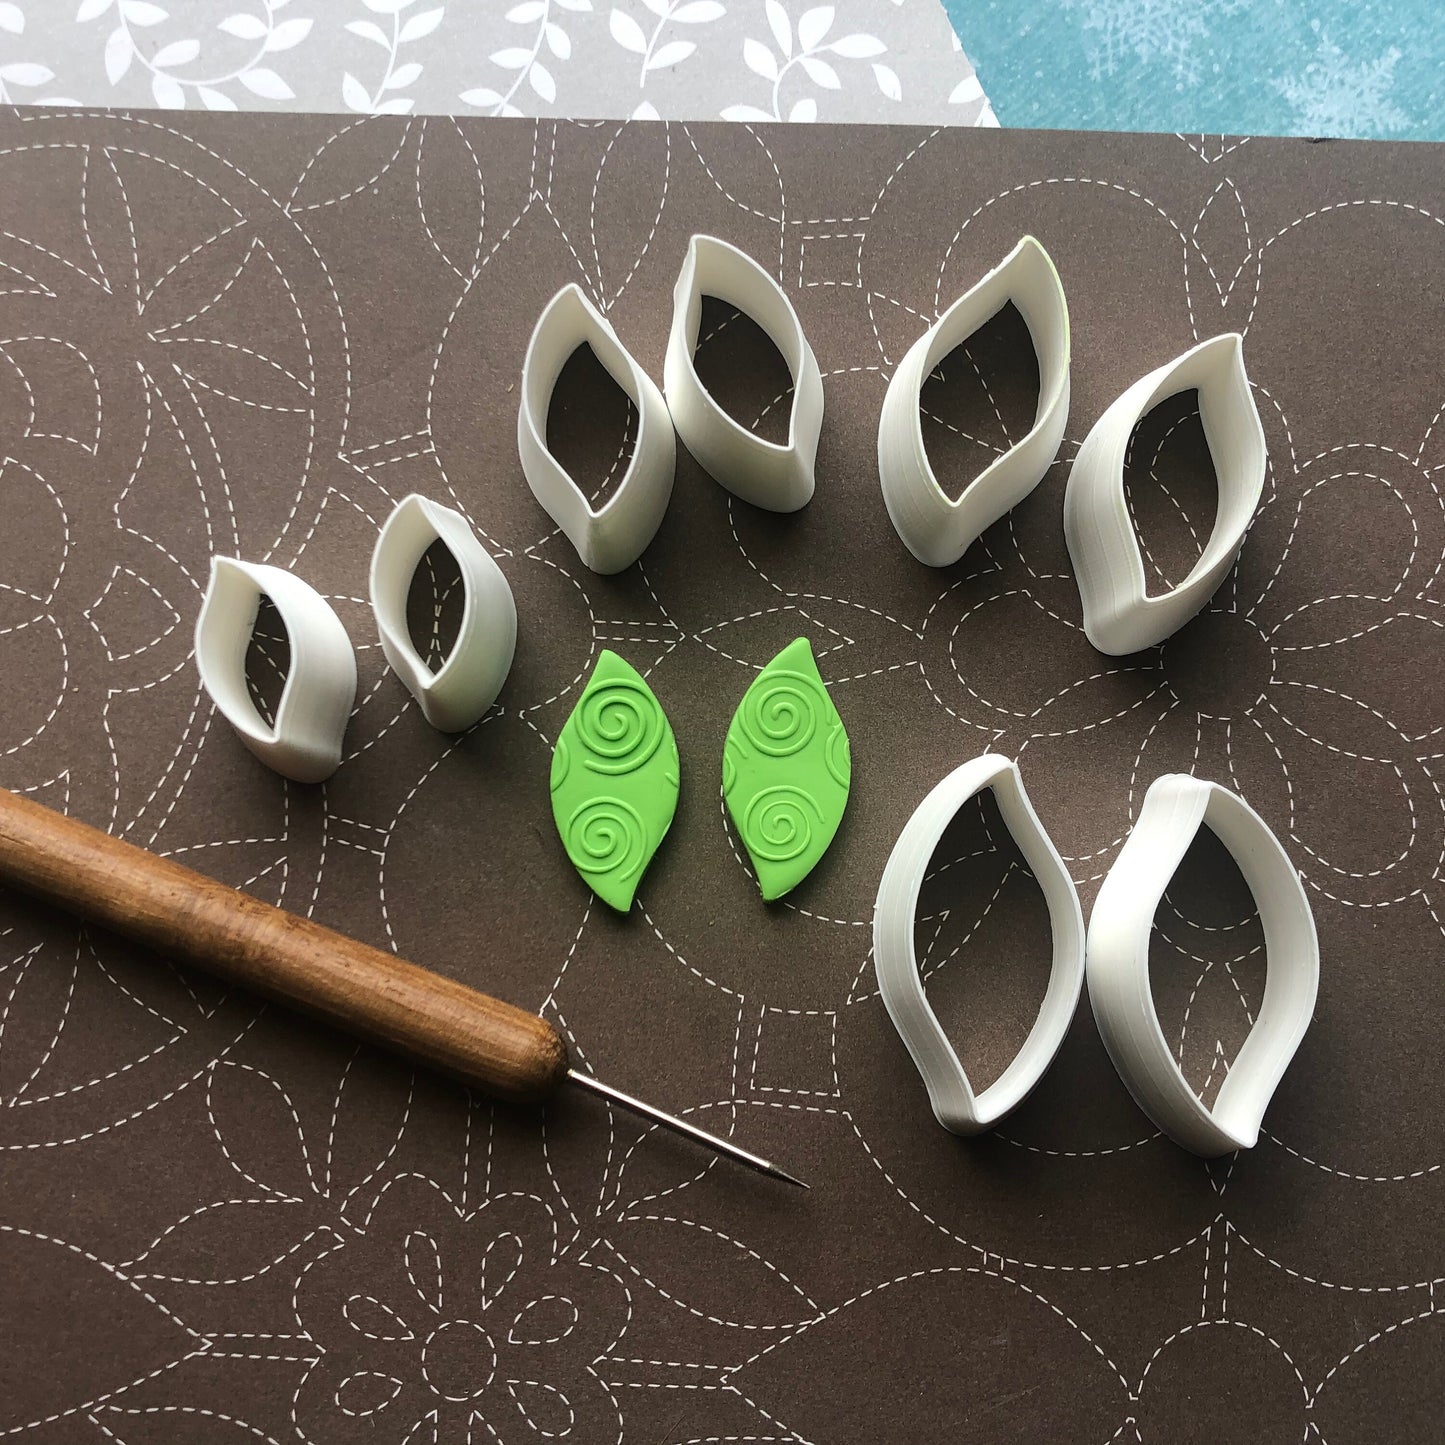 Wavy leaf shape cutter set - made for use with polymer clay